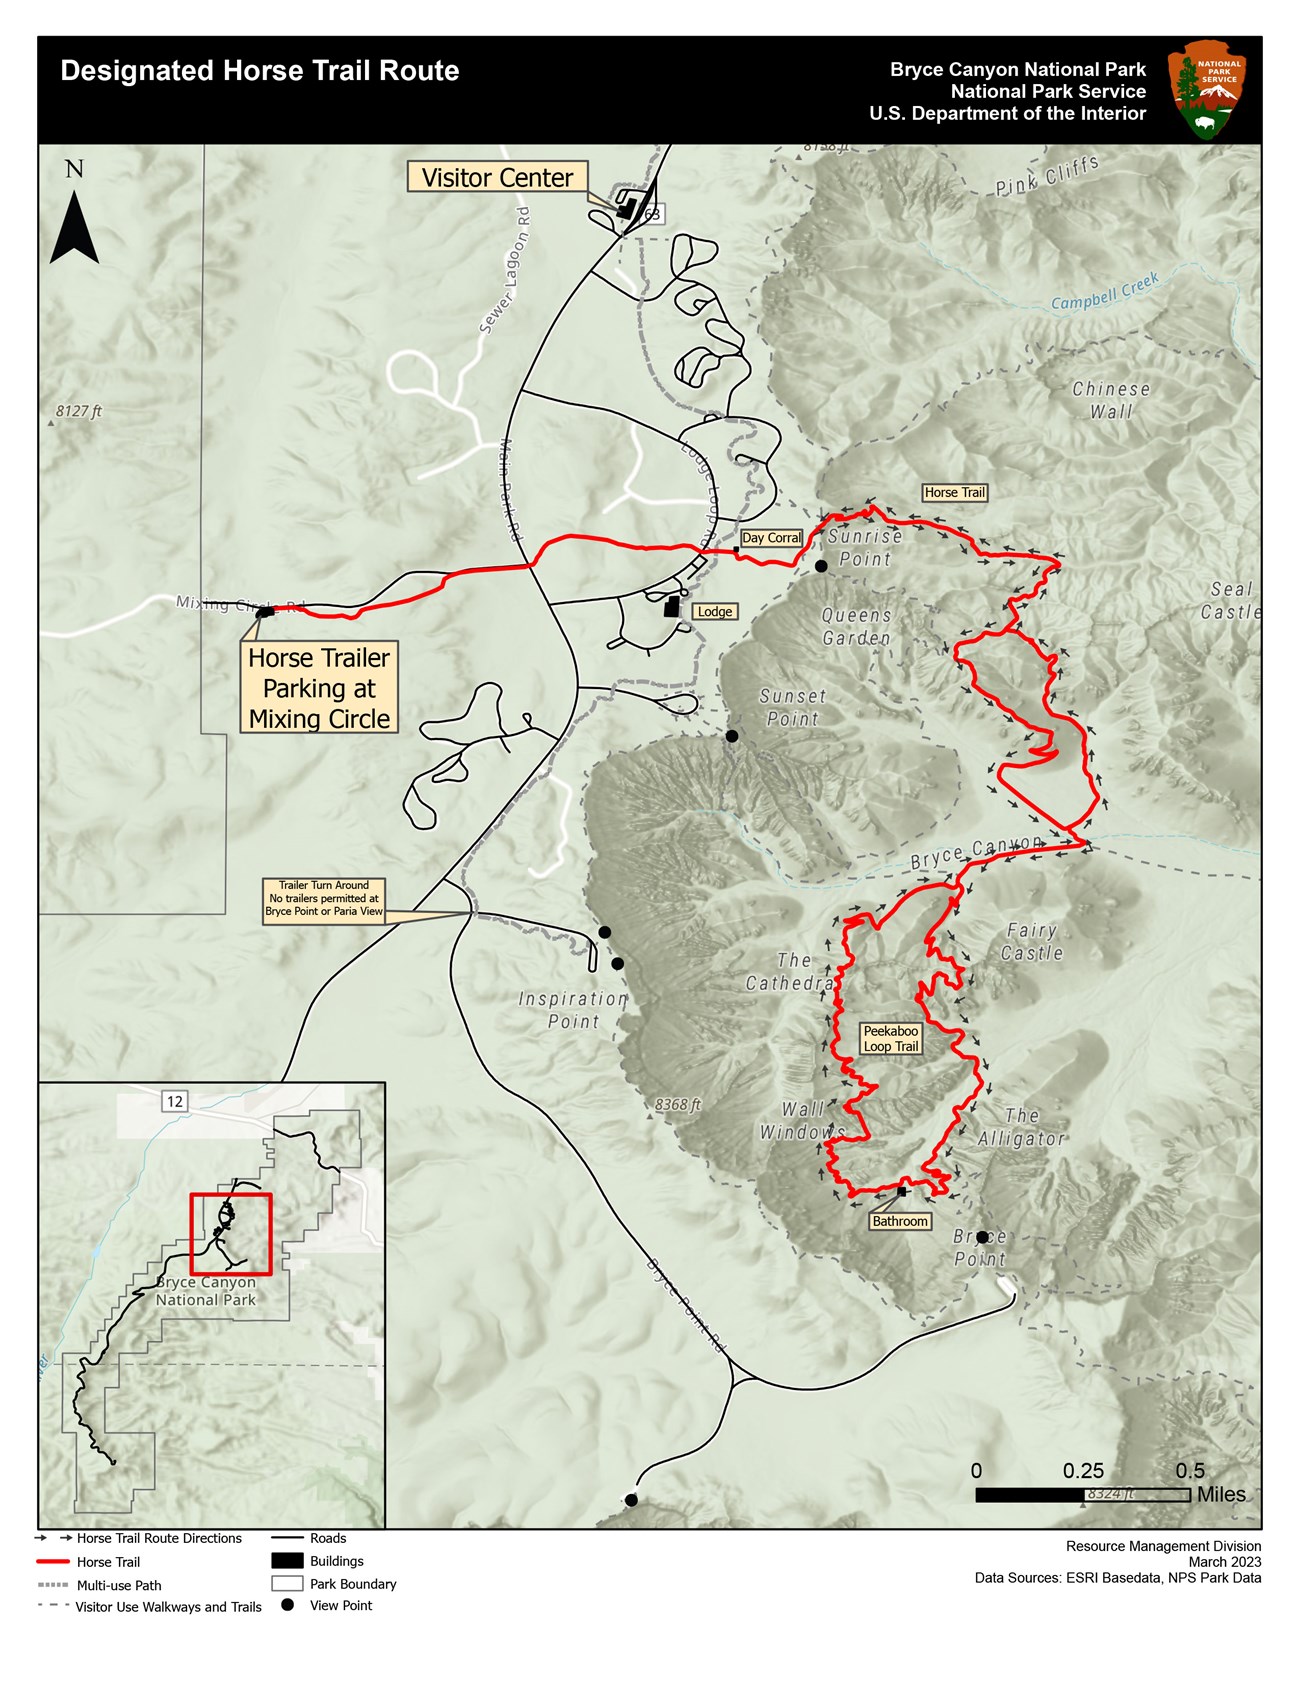 A map with a red line marking the designated horse trail route. Small black arrows show route directions moving in a figure-8 direction.